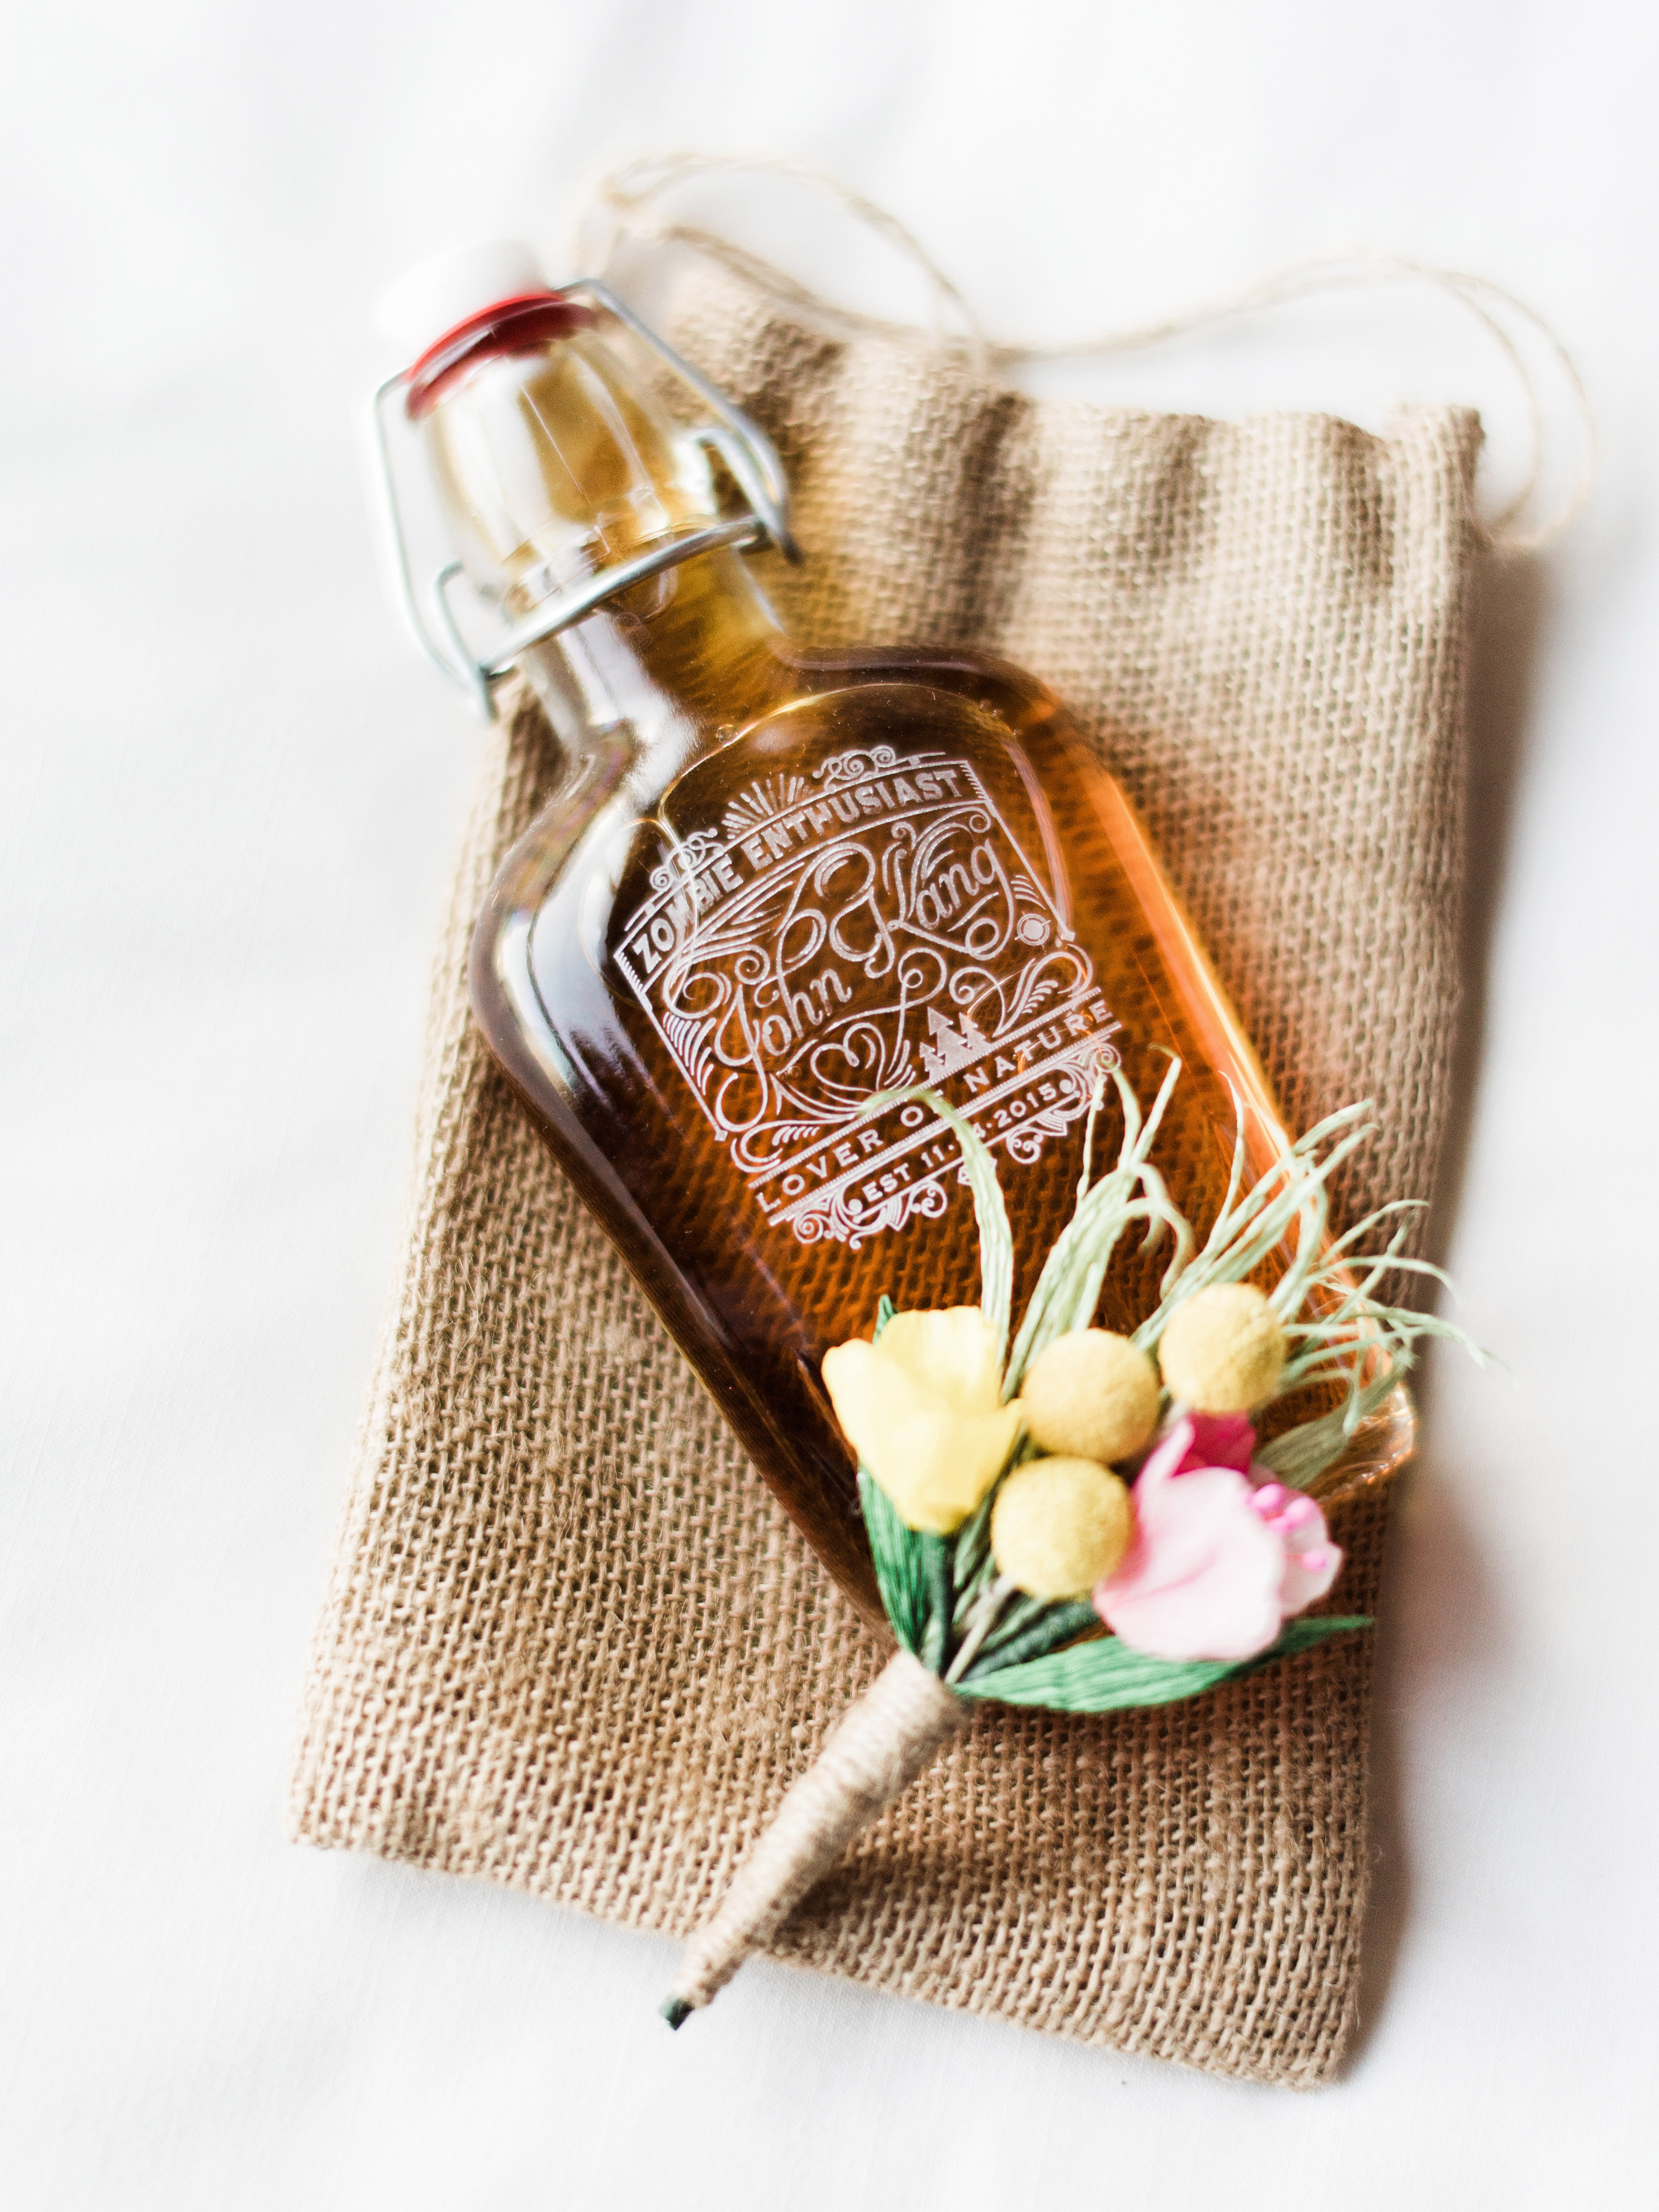 50 Creative Wedding Favors That Will Delight Your Guests Martha Stewart Weddings